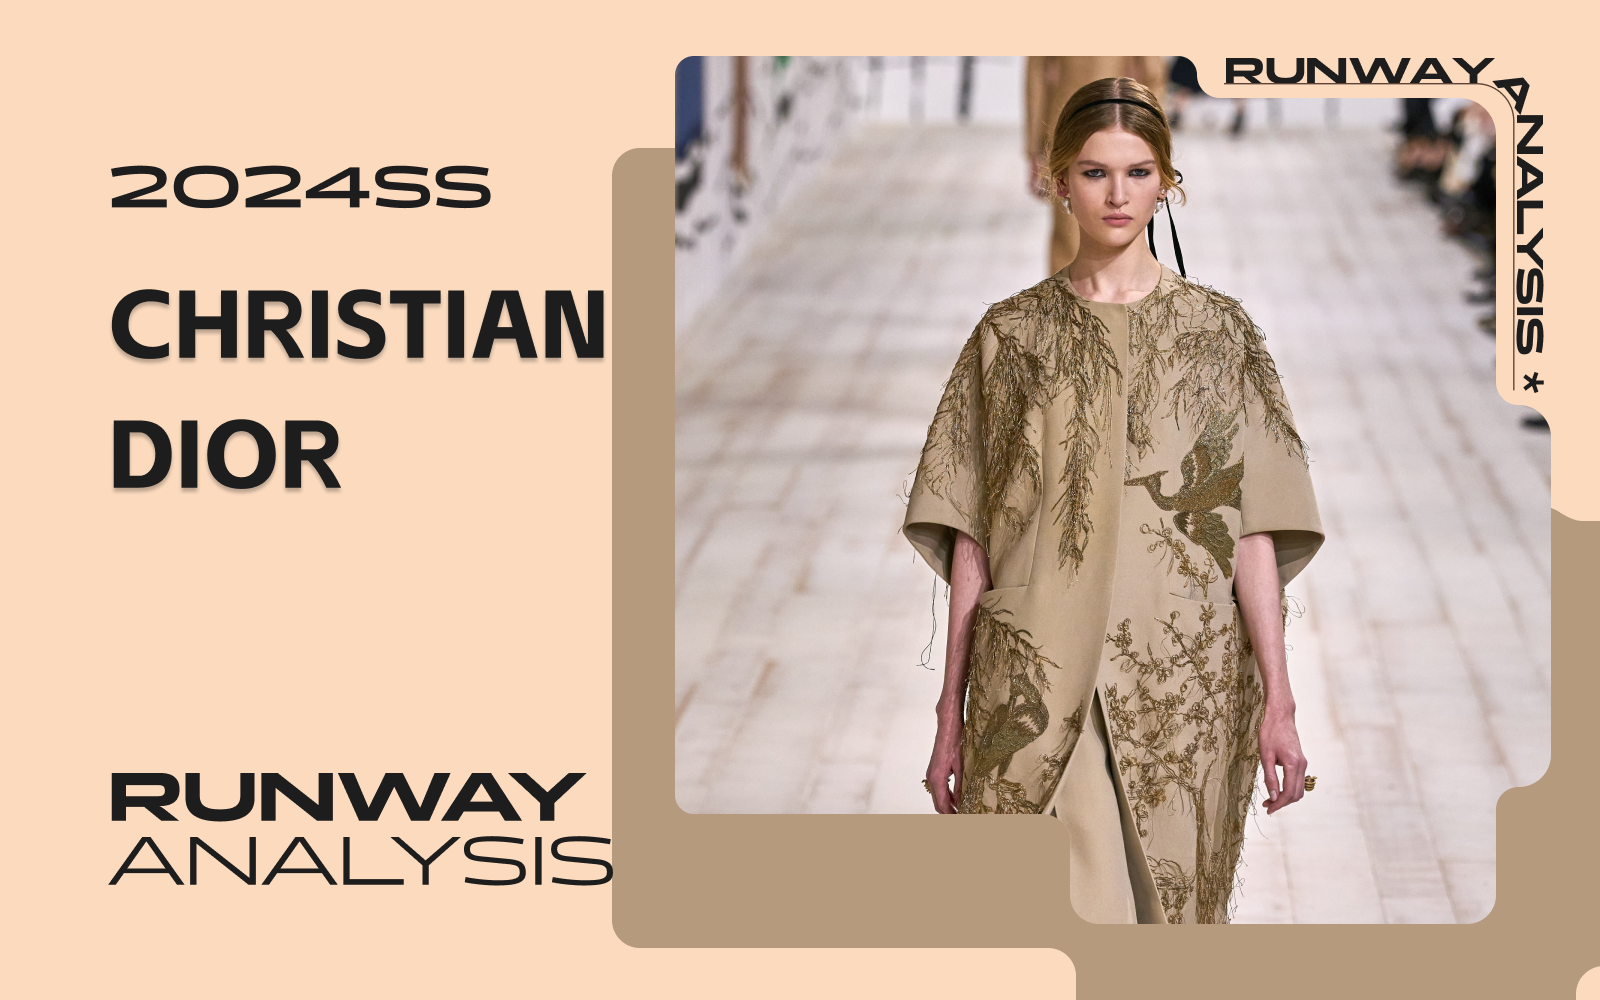 Aesthetic Essence -- The Haute Couture Runway Analysis of Christian Dior